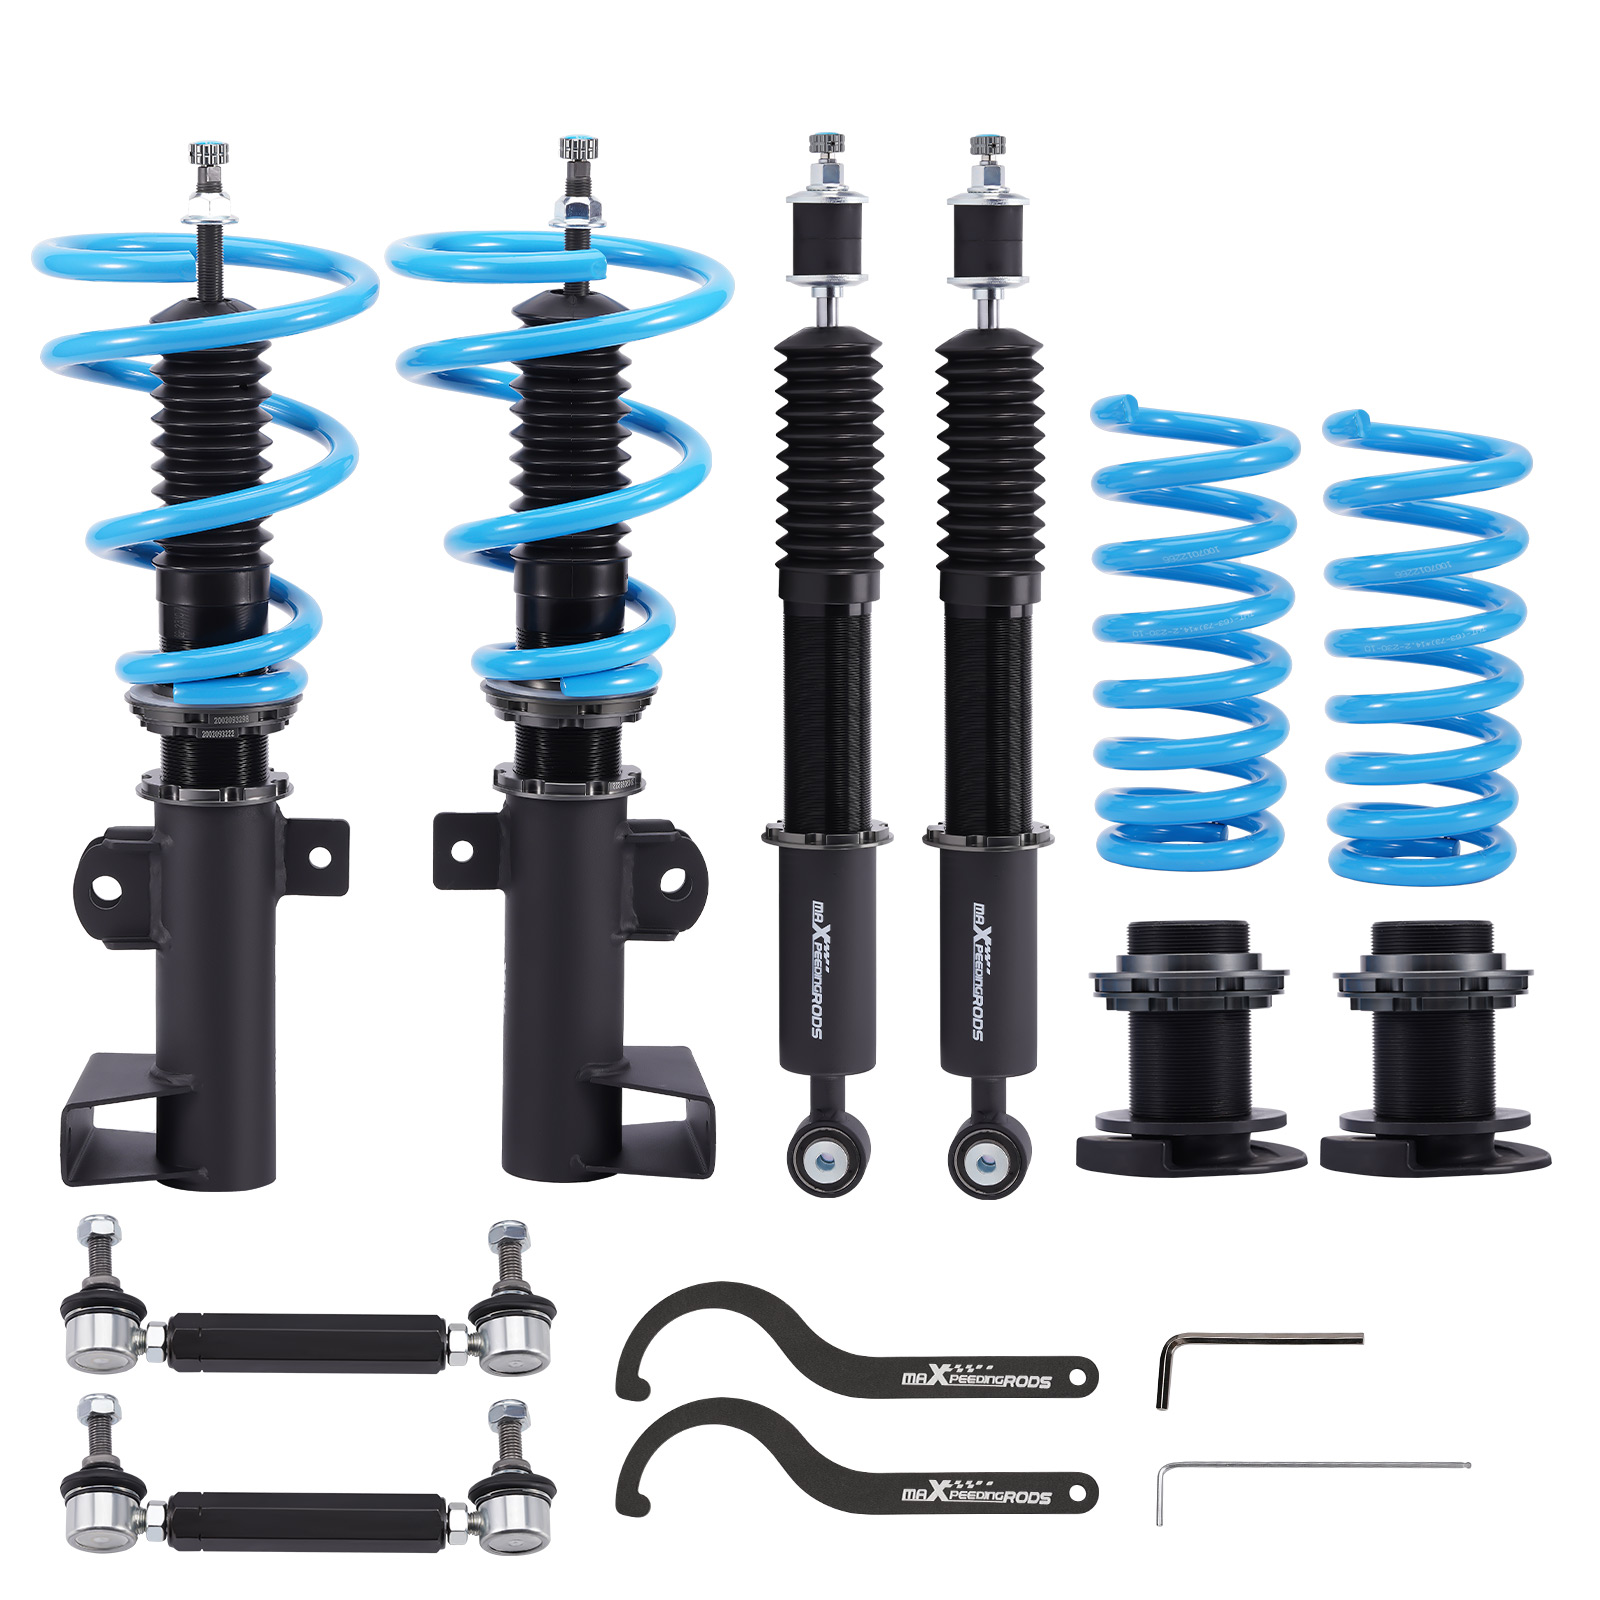 24 Way Damper Coilovers Suspension Kit for Mercedes Benz C-class W203 2000-2007